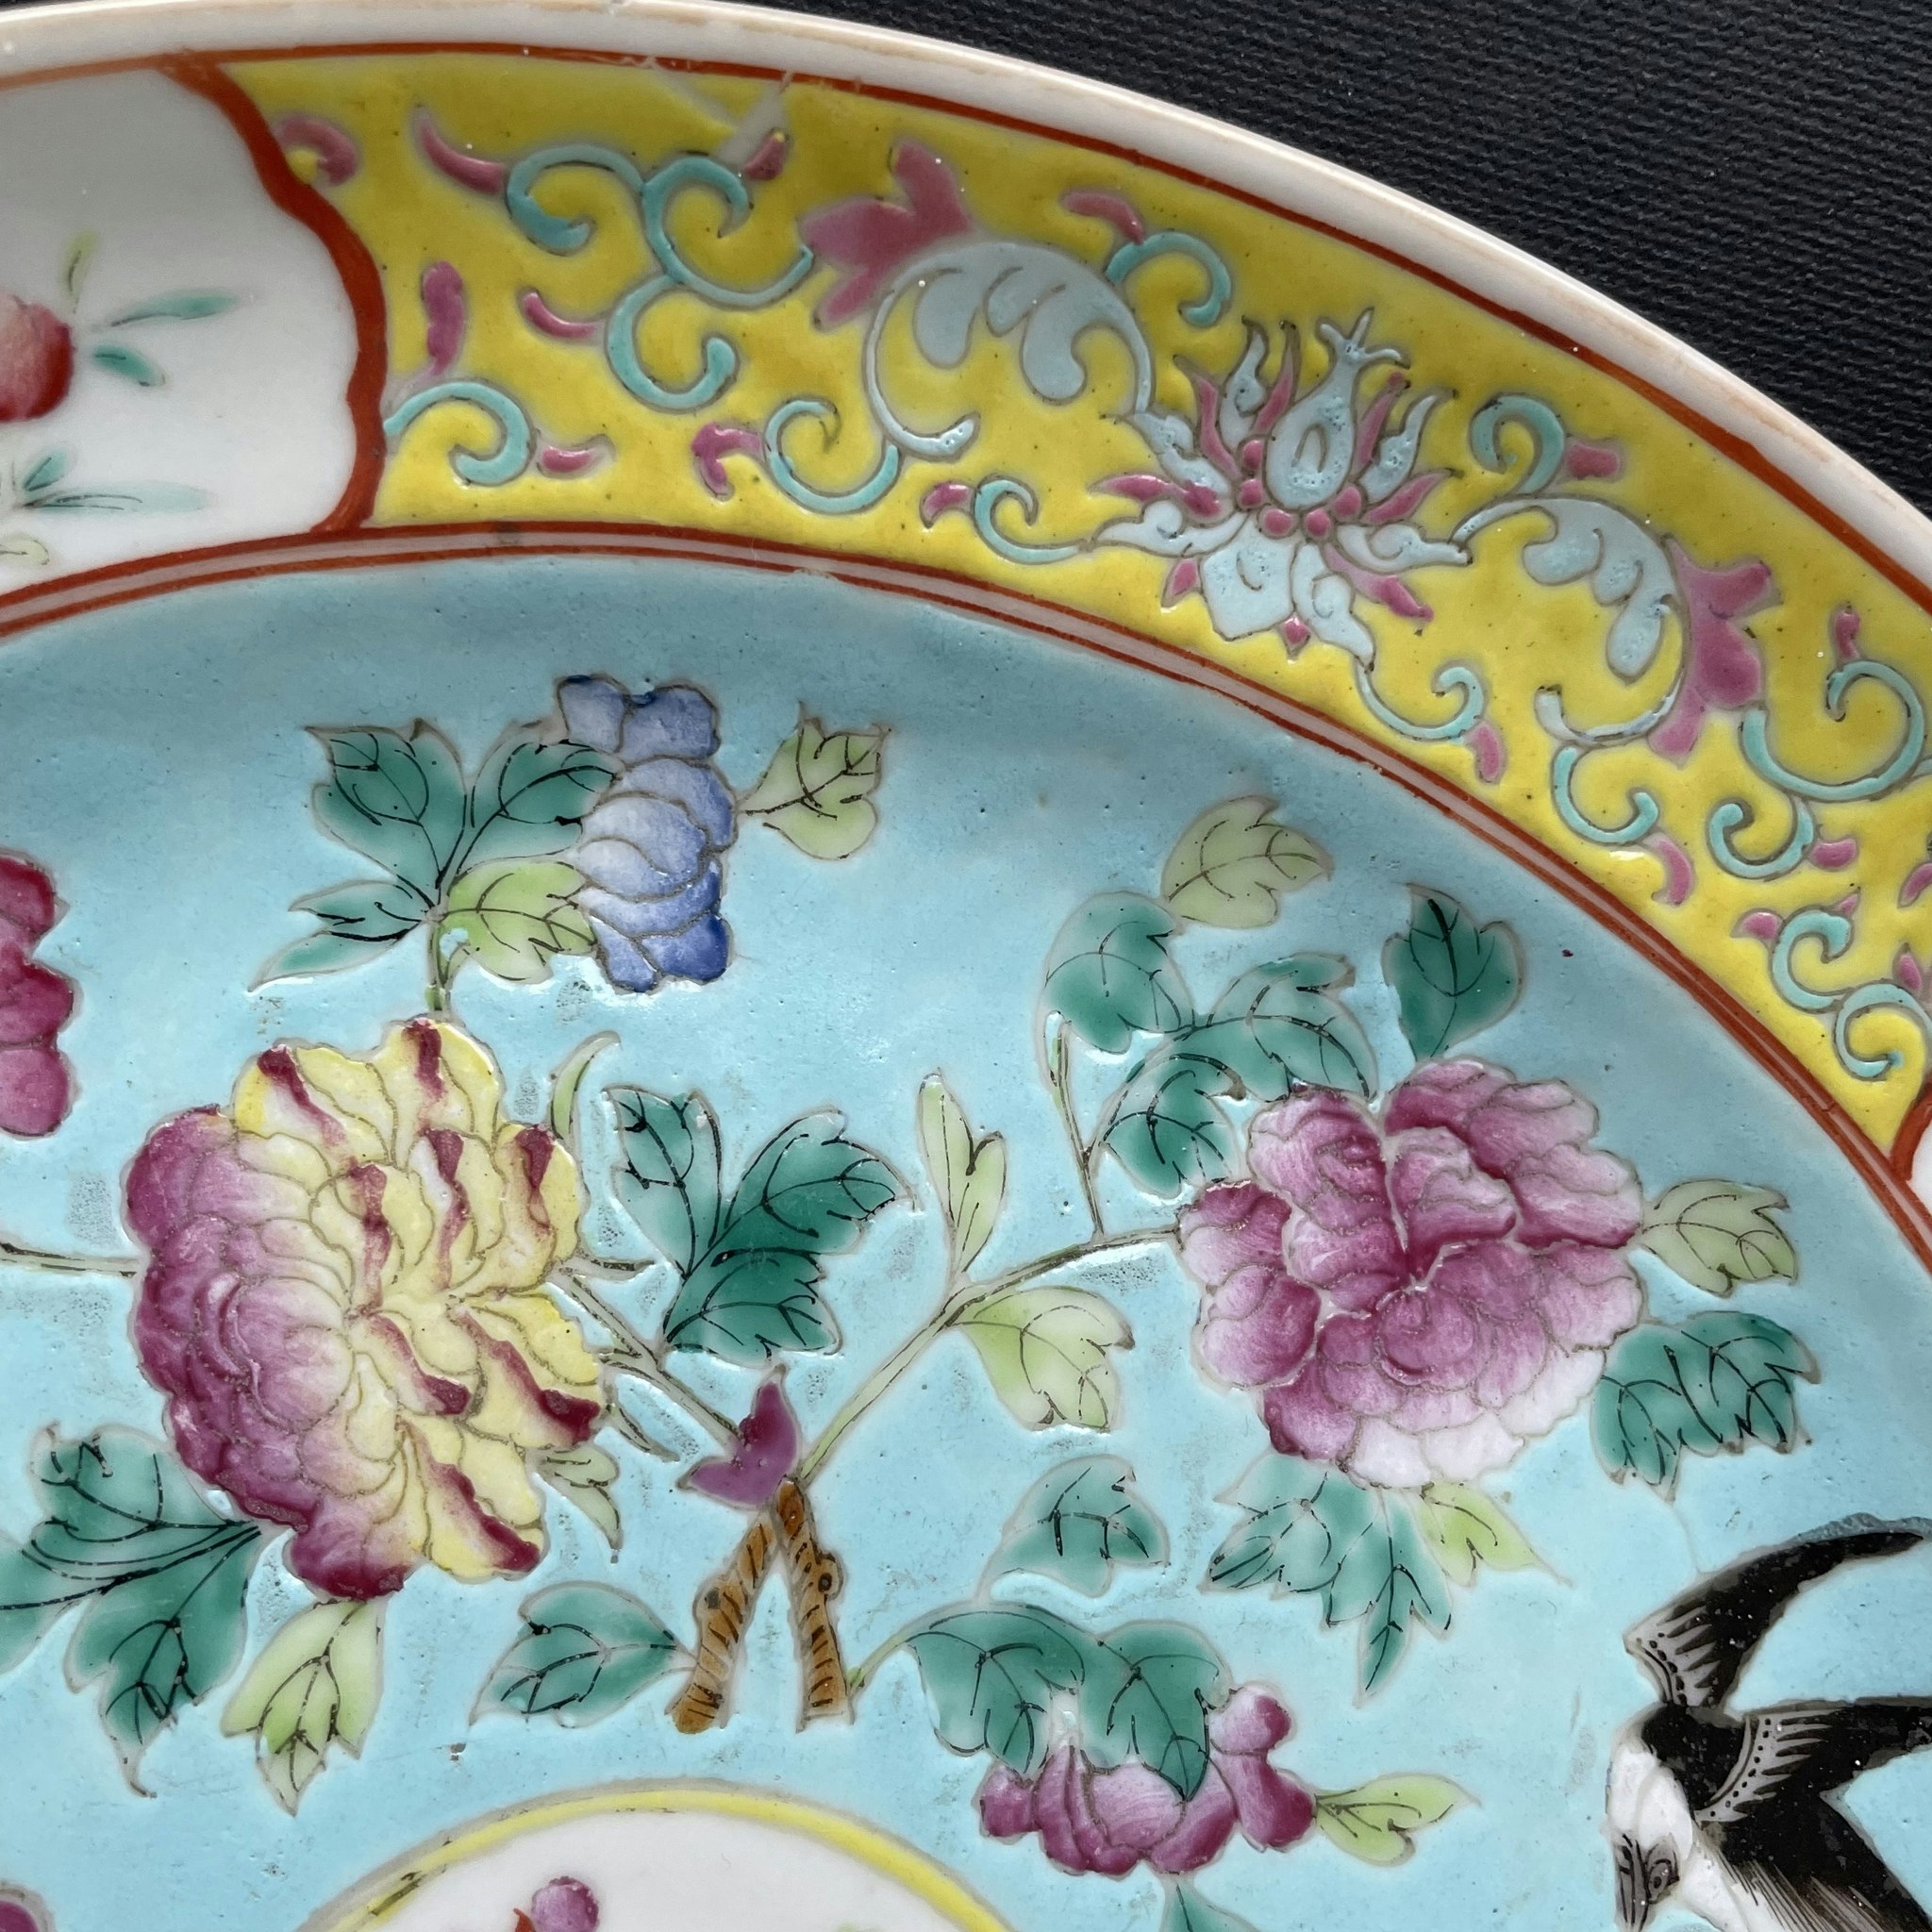 Chinese Antique Porcelain plate, 19th c, Qing Dynasty #1771